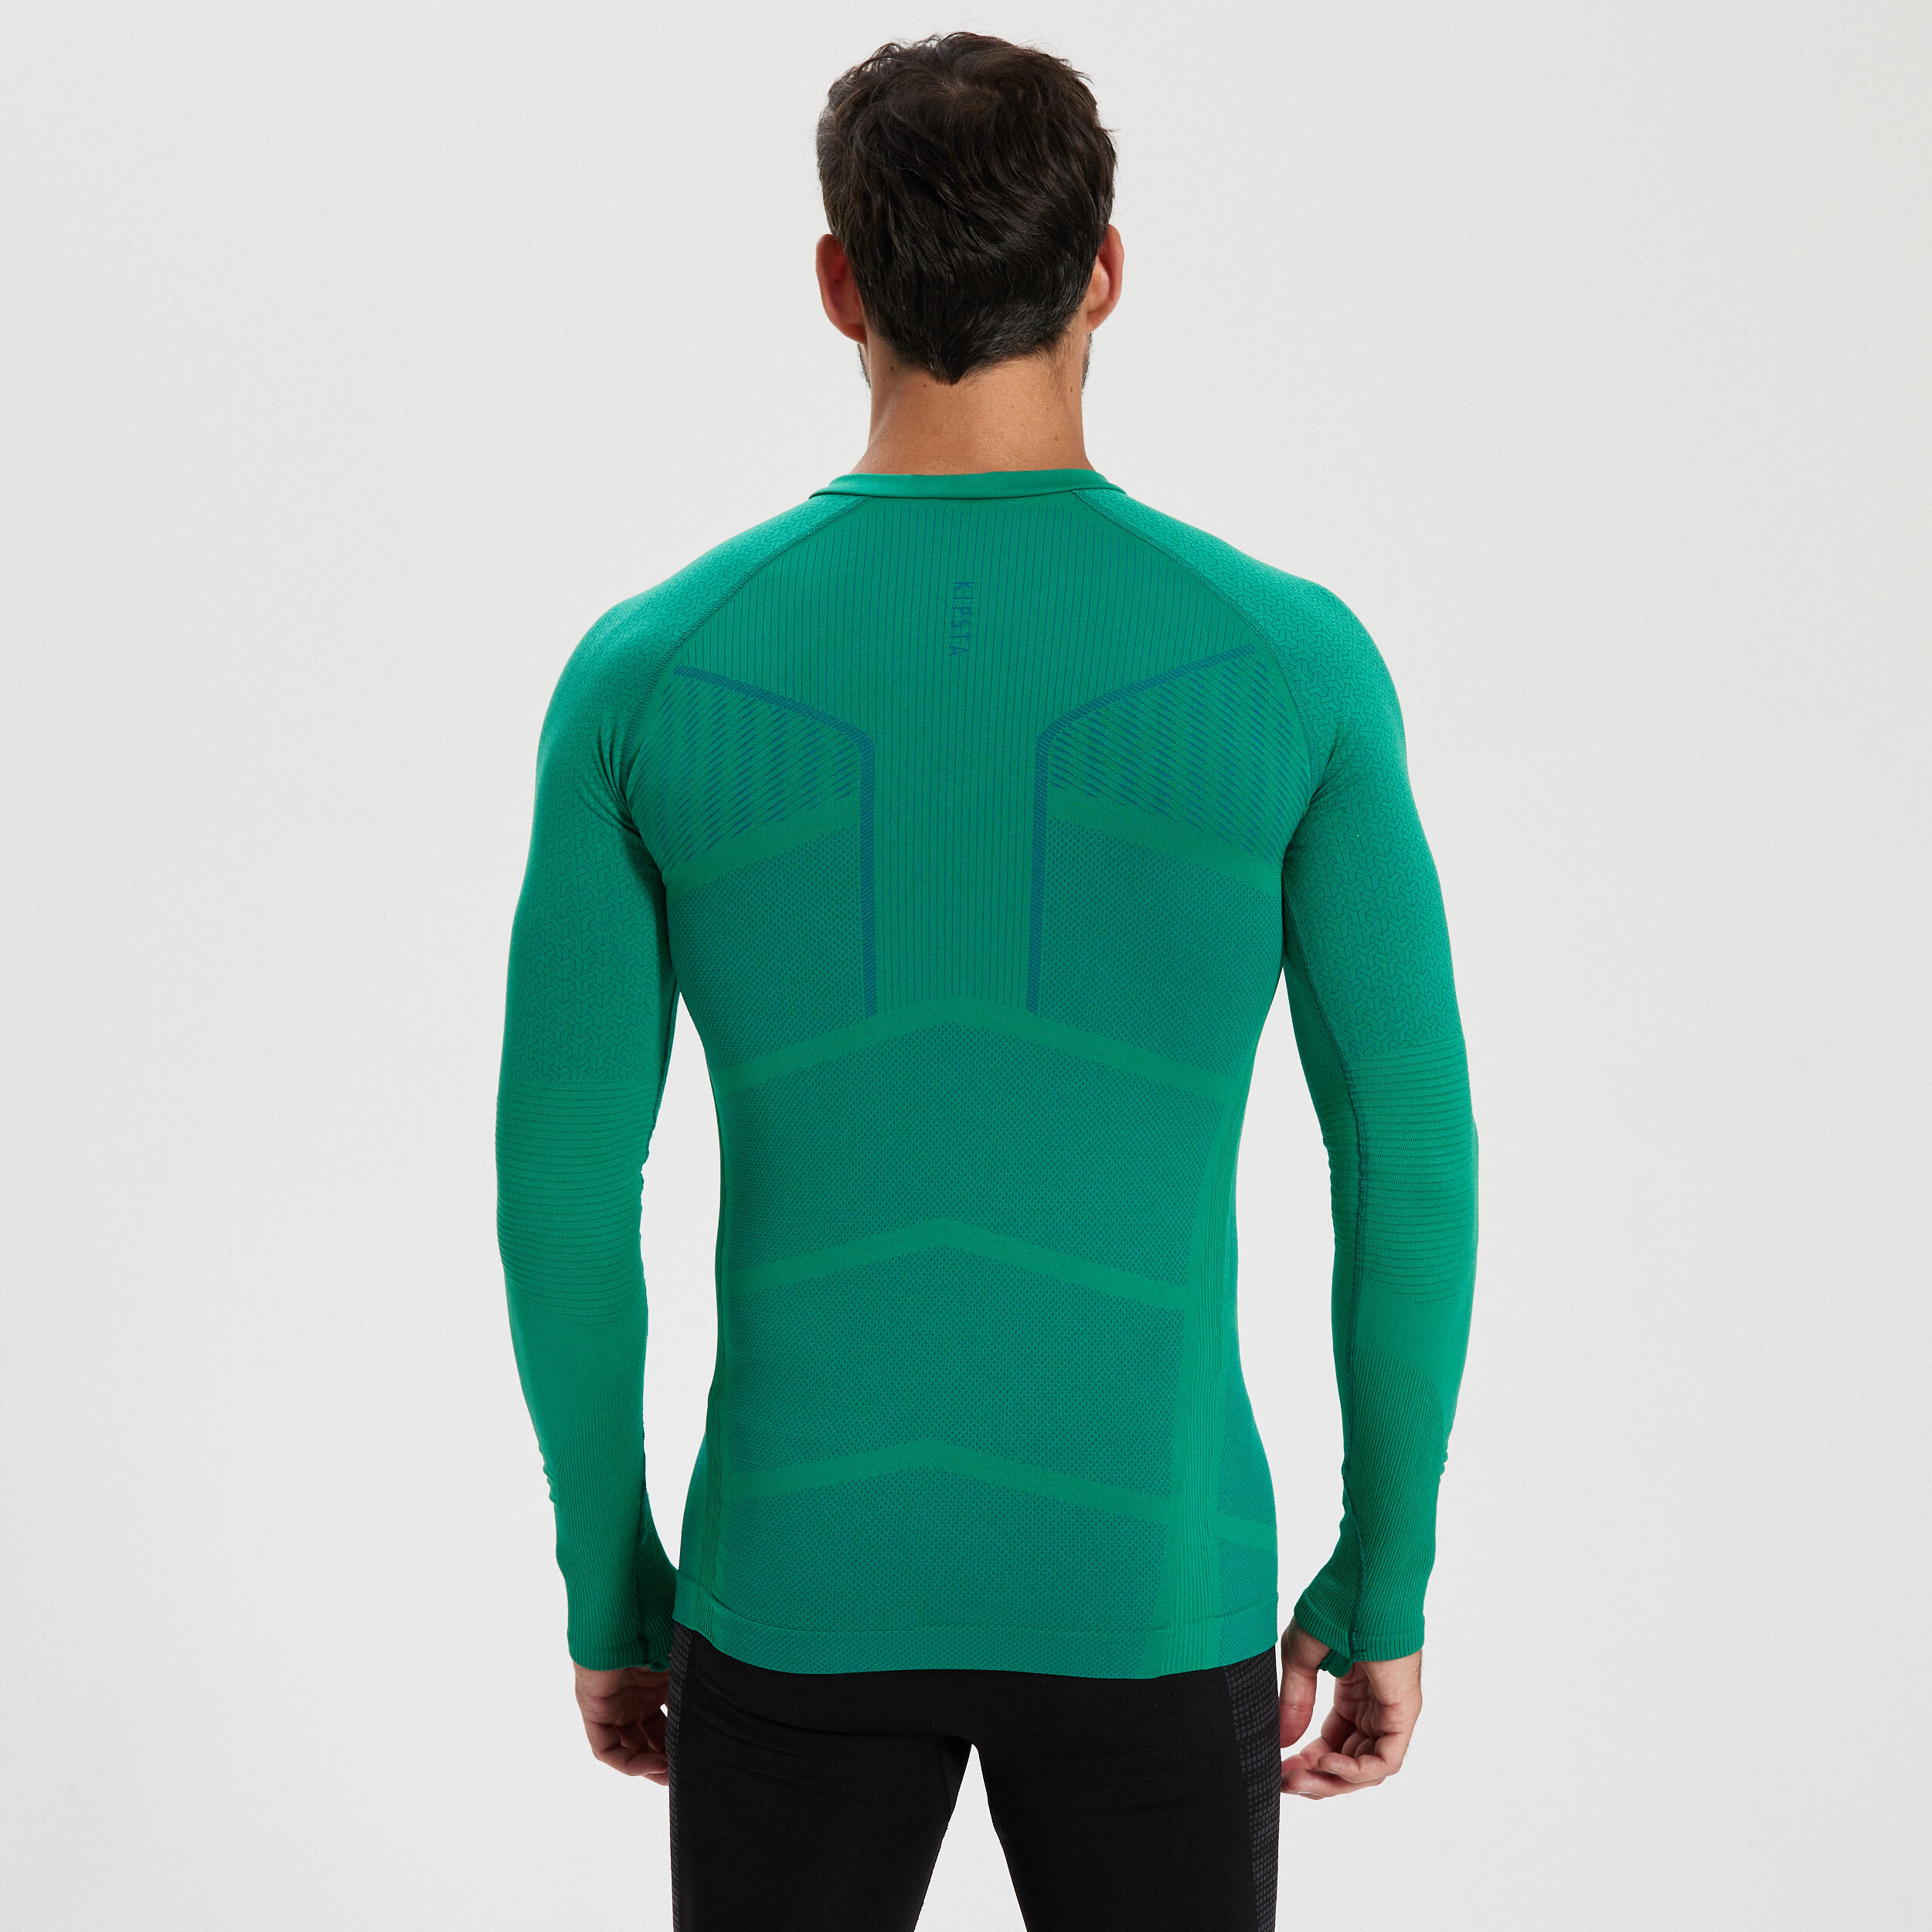 Adult Long-Sleeved Thermal Base Layer Top Keepdry 500 - Green 6/14